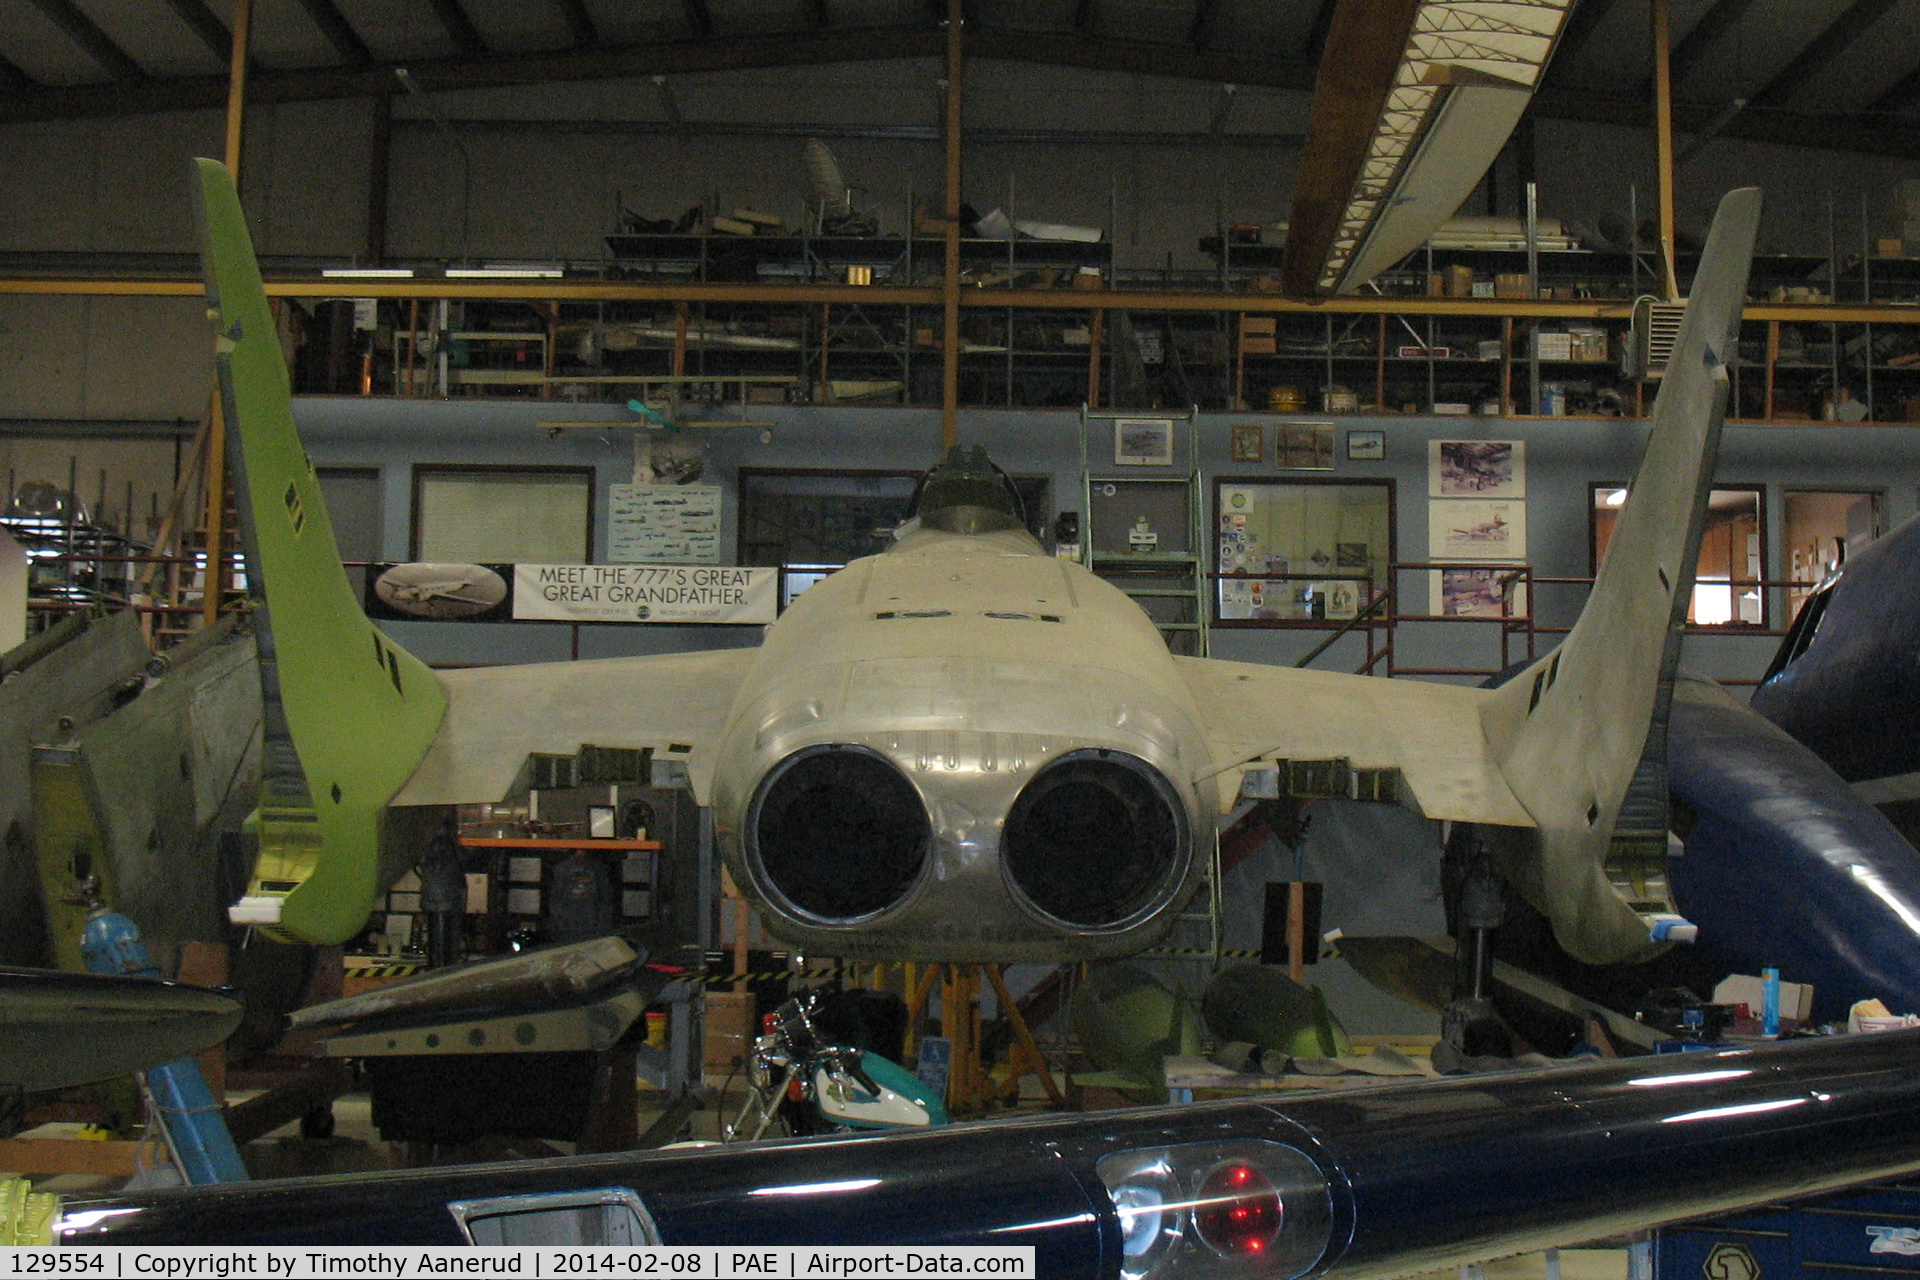 129554, Vought F7U-3 Cutlass C/N 38, Vought F7U-3 Cutlass, c/n: 38, Restoration Facility Seattle Museum of Flight.  Now in Phoenix, AZ being restored to airworthy.